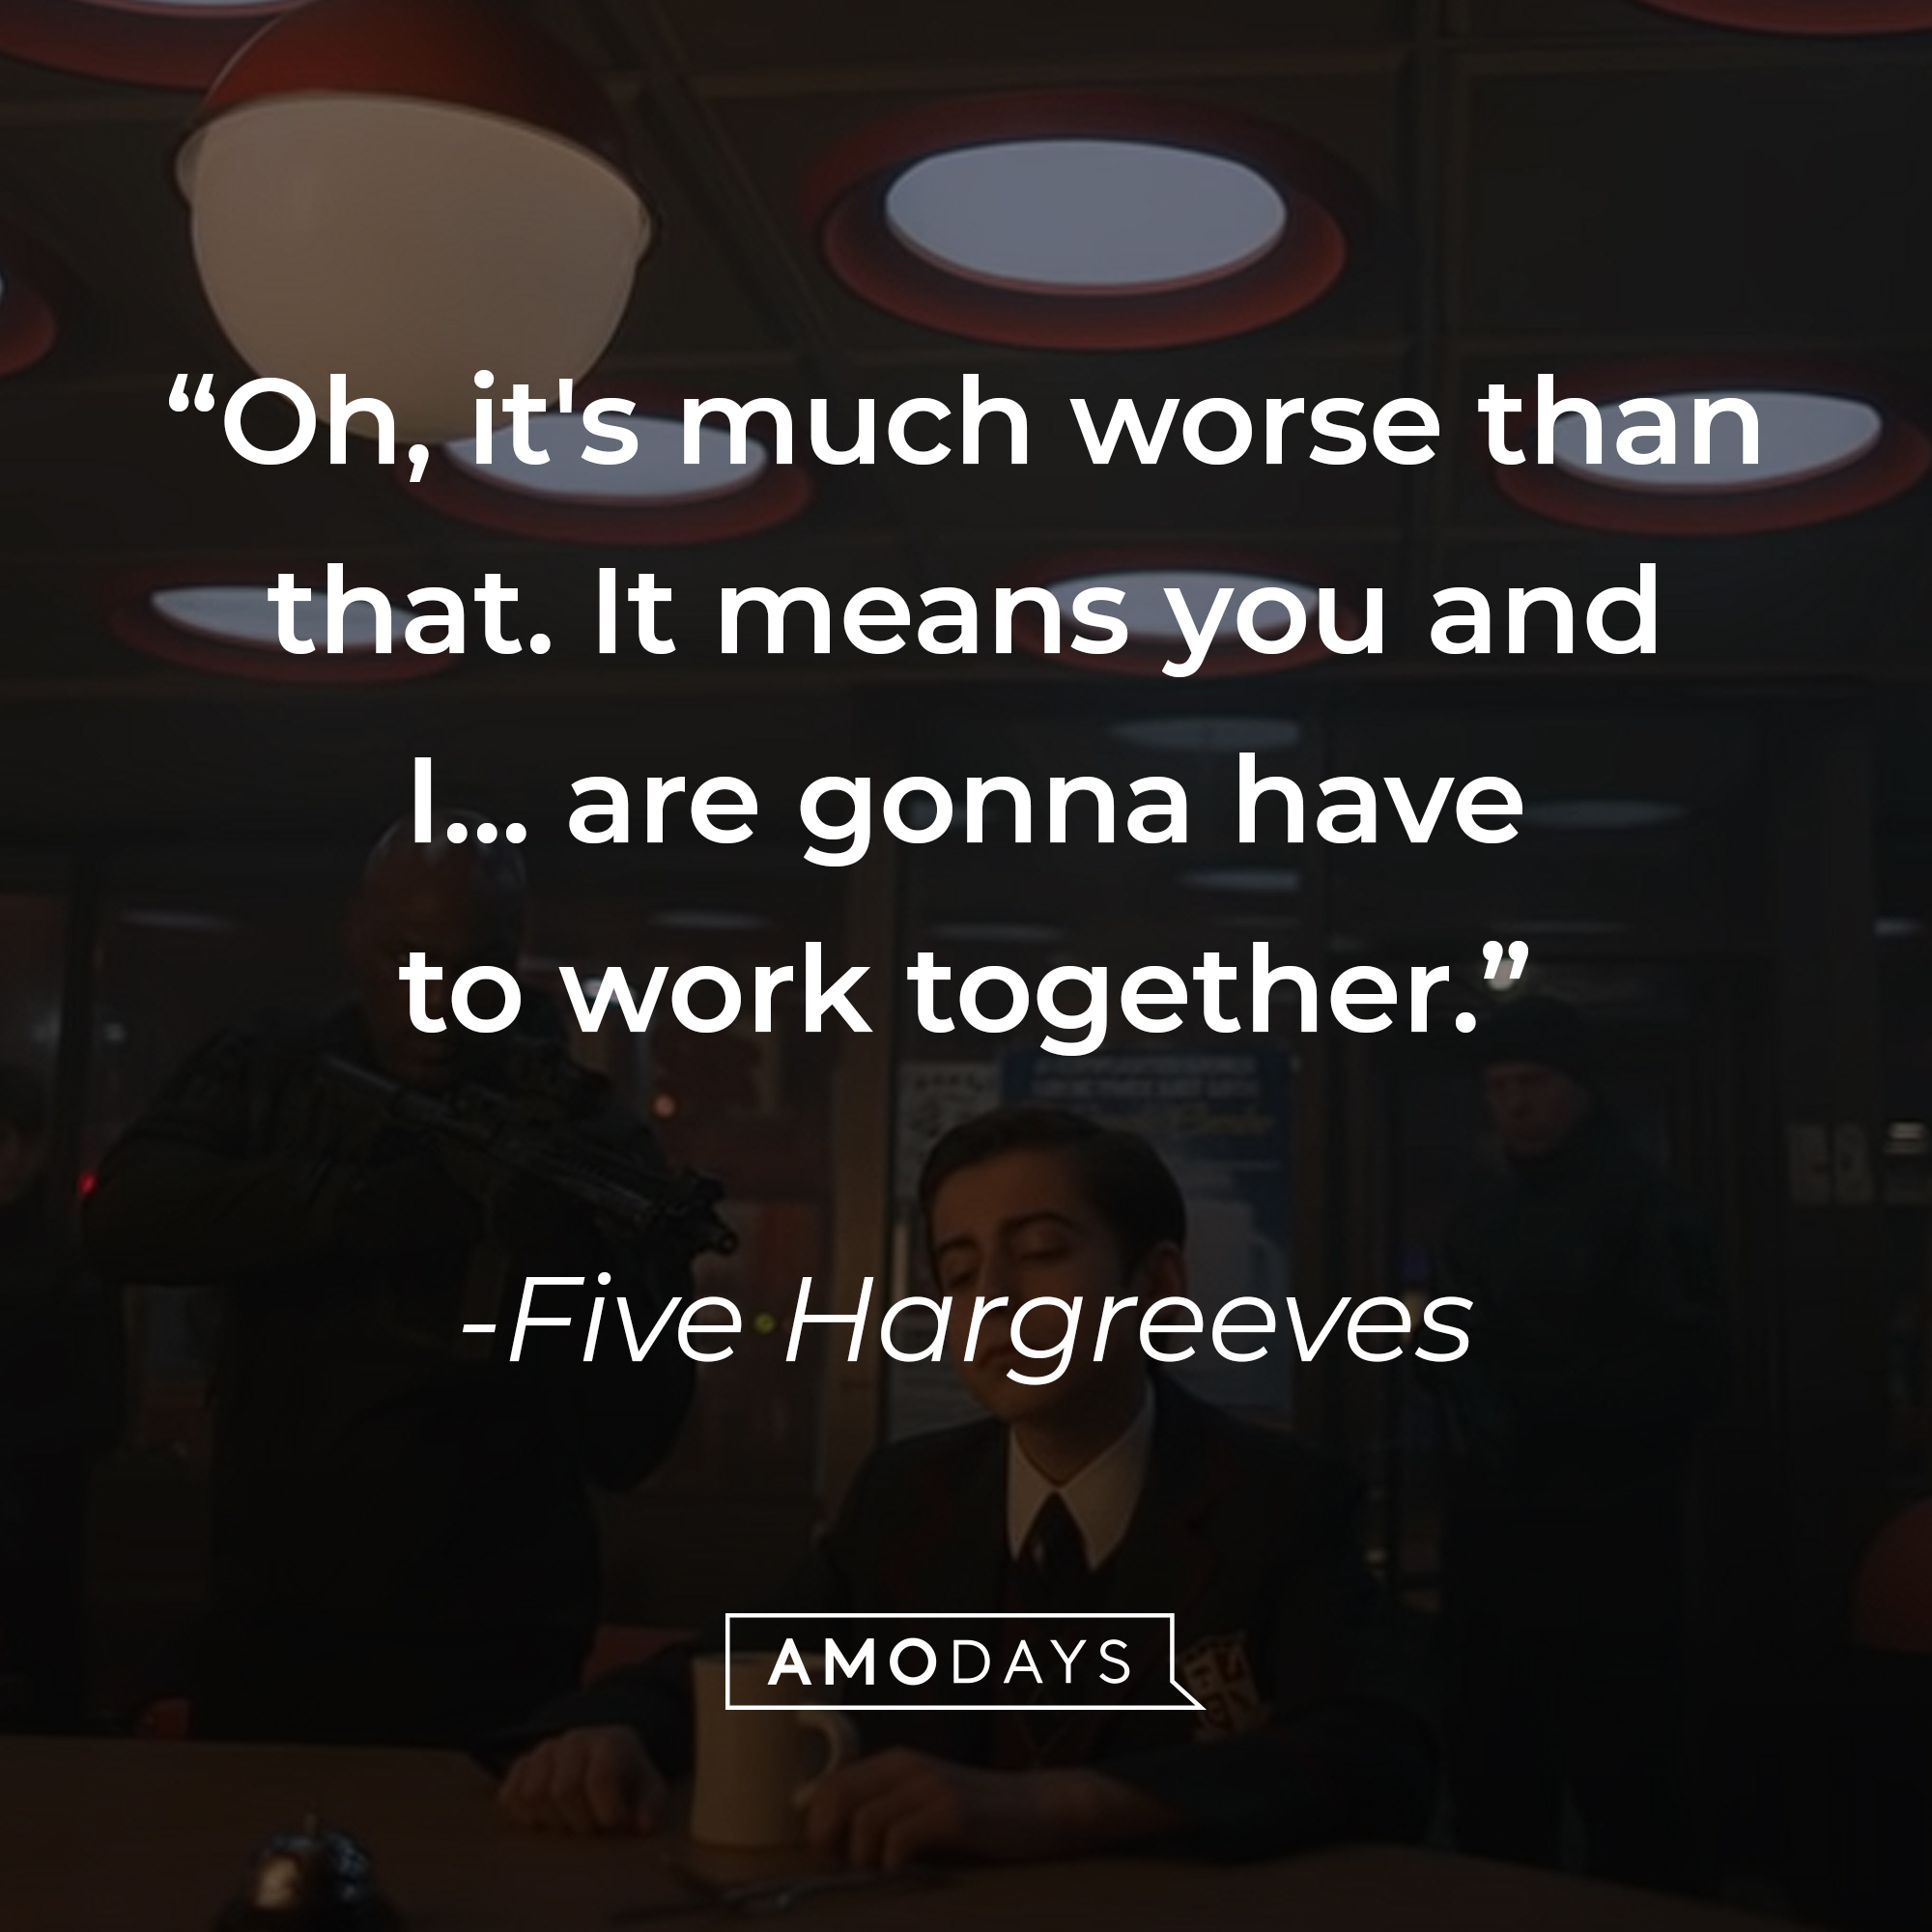 Five Hargreeves’ quote: “Oh, it's much worse than that. It means you and I... are gonna have to work together.” | Source: youtube.com/Netflix